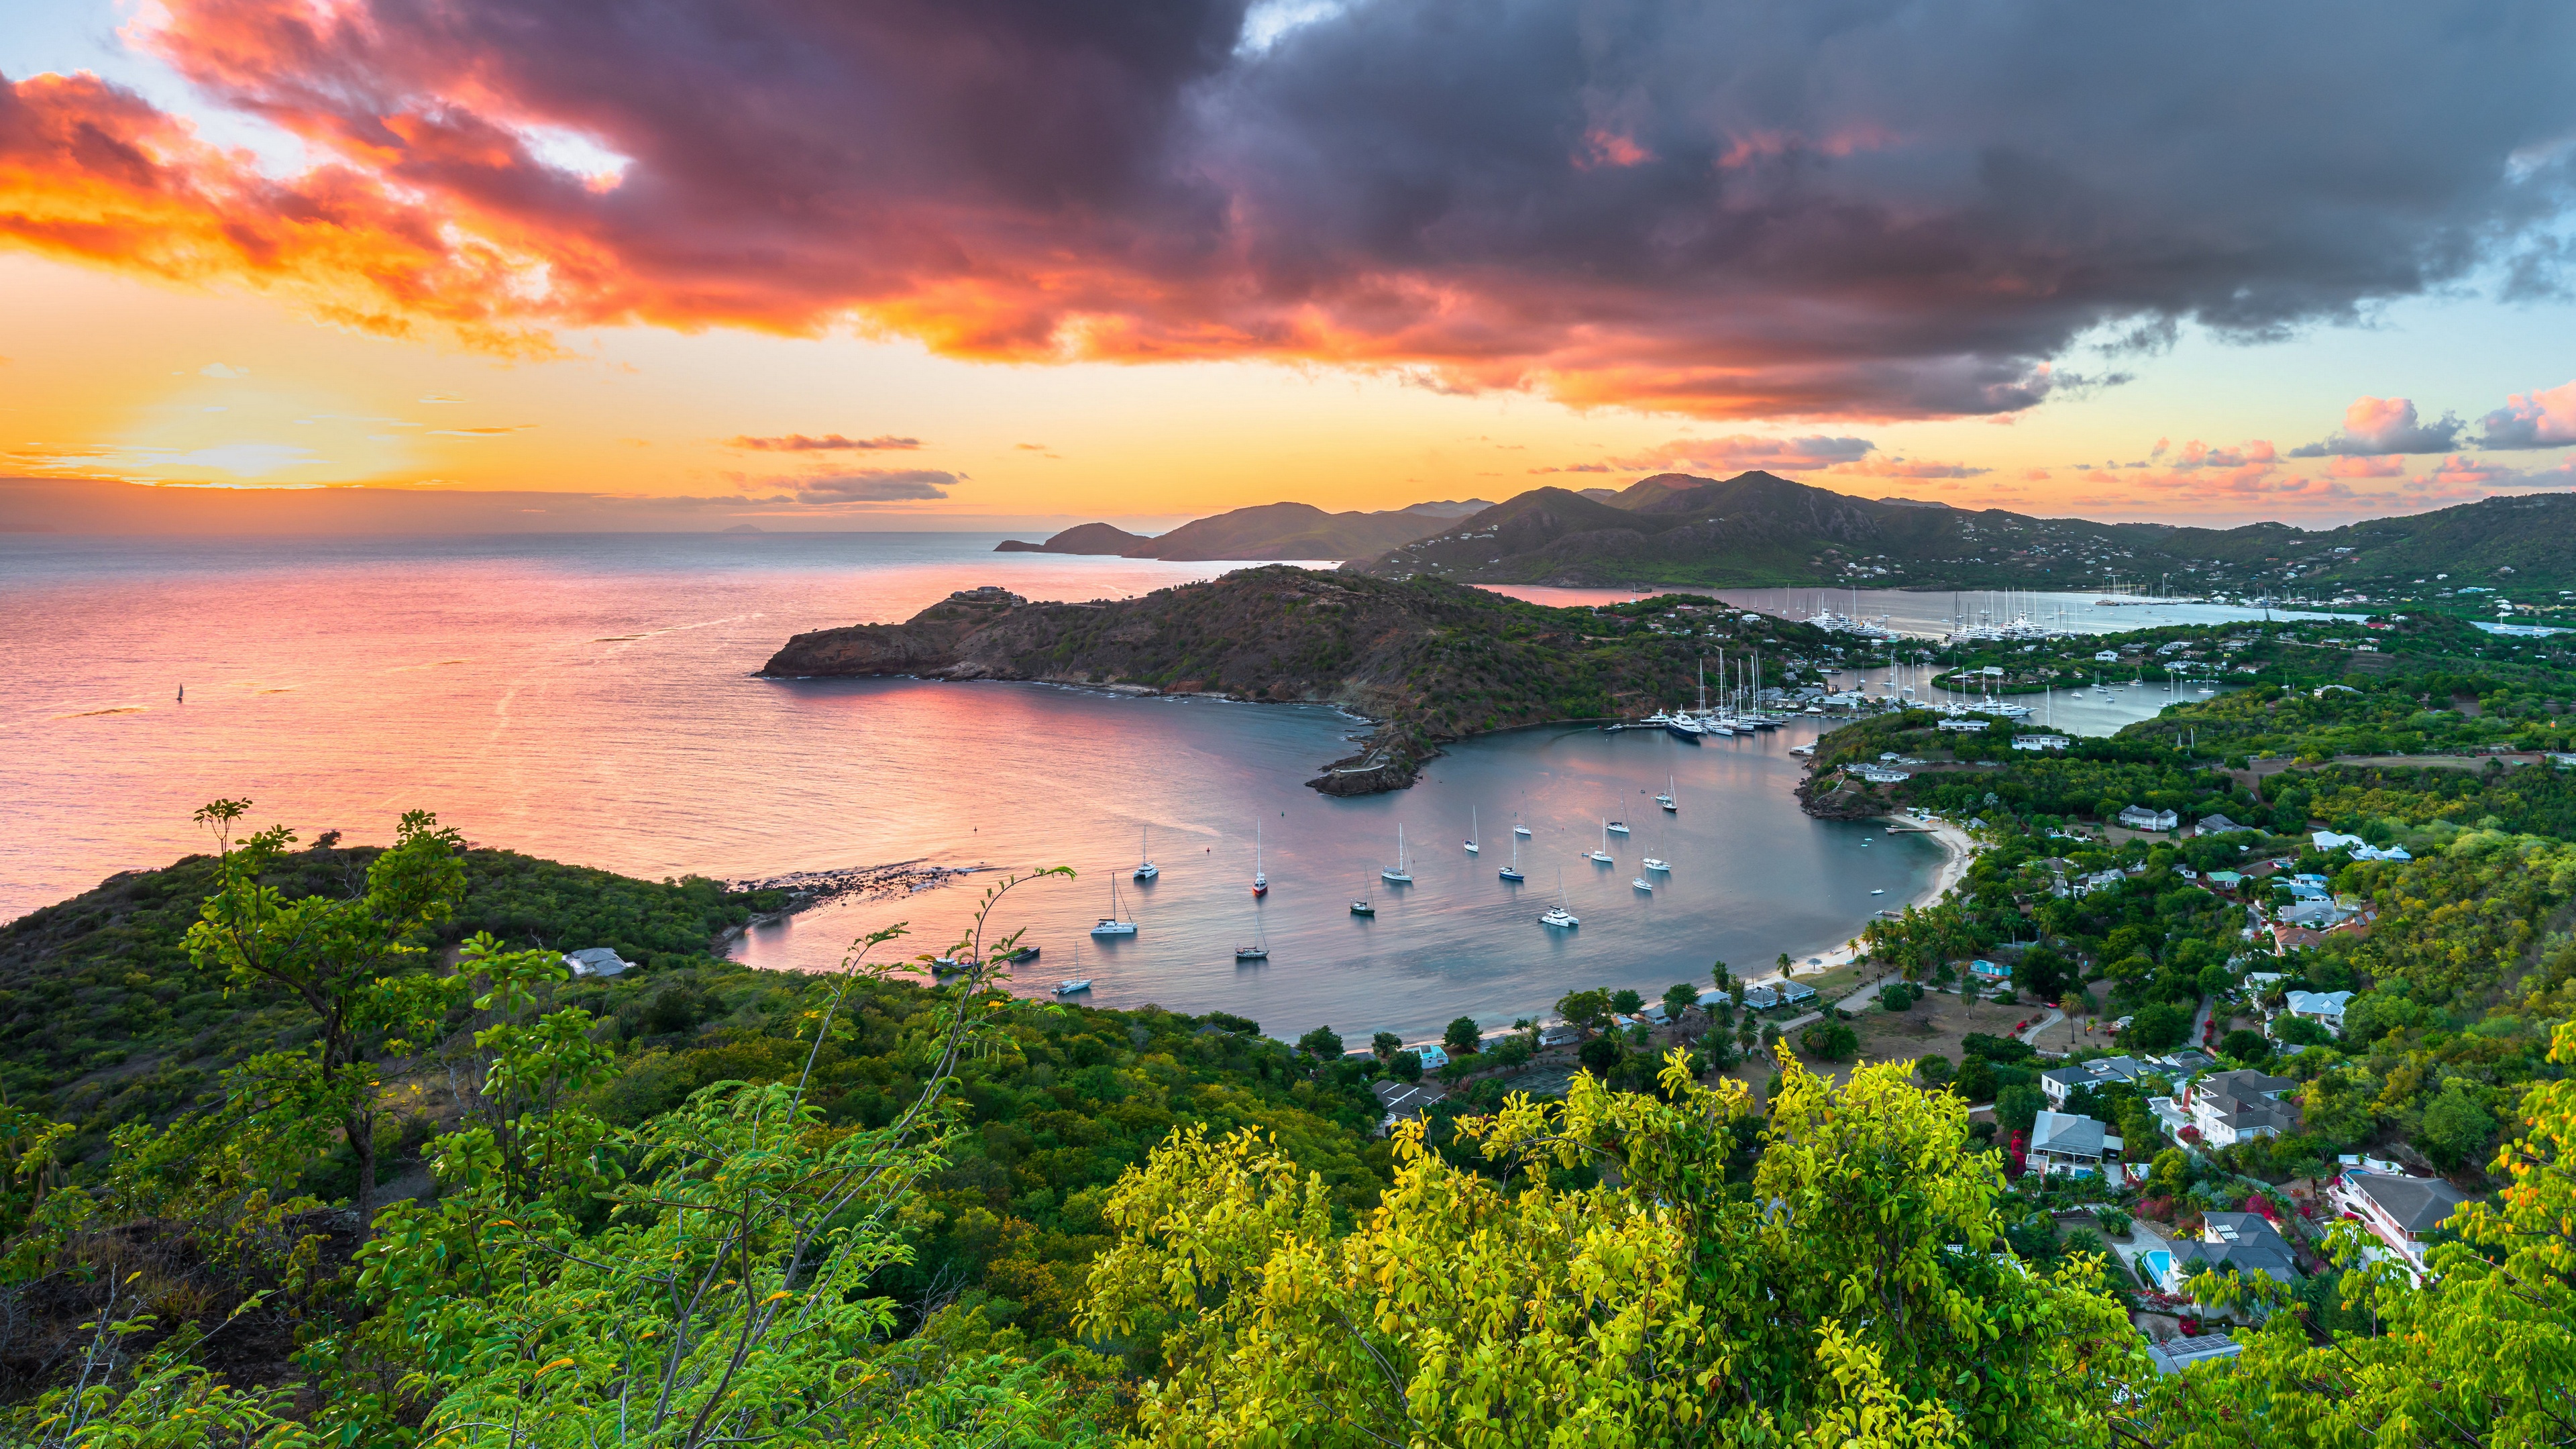 General 3840x2160 Antigua and Barbuda island sea bay nature city sky sunset clouds ship landscape water sunset glow